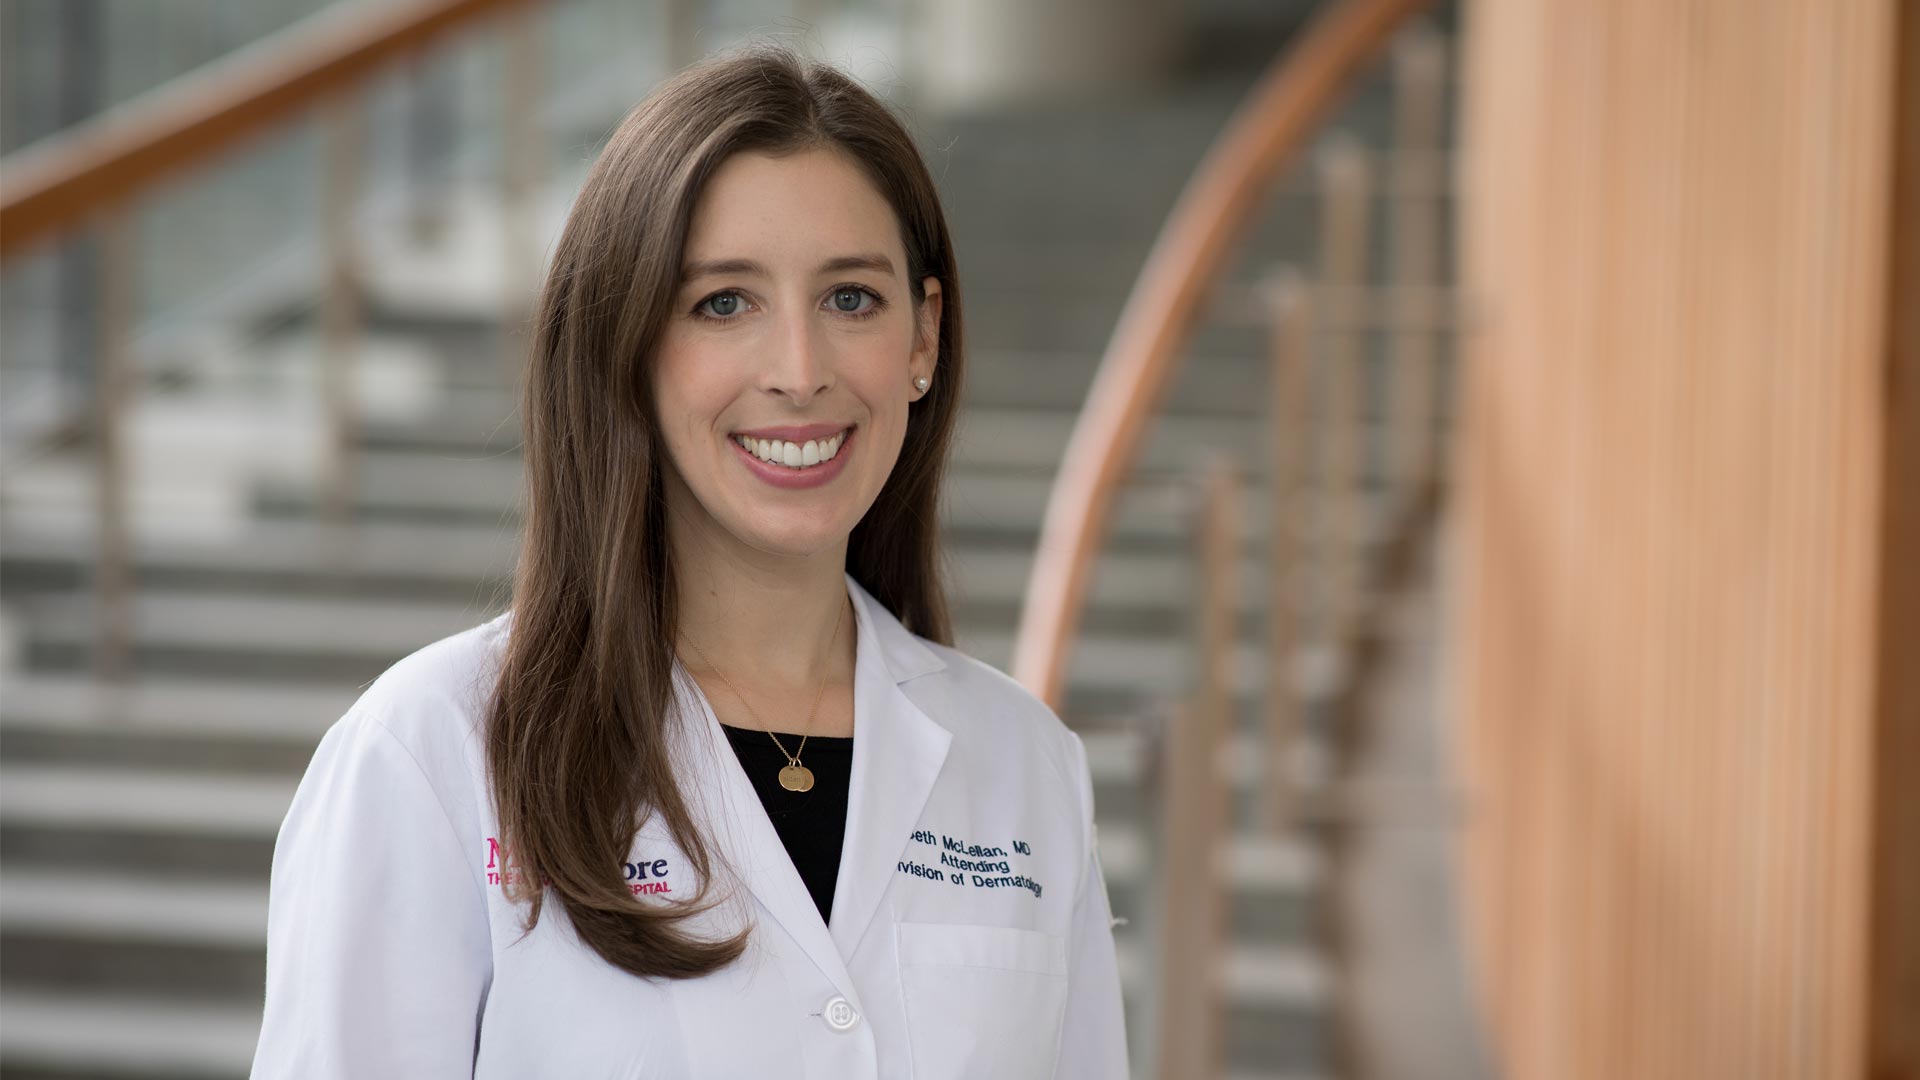 Beth McLellan, M.D., Named Chief of the Division of Dermatology at Einstein and Montefiore